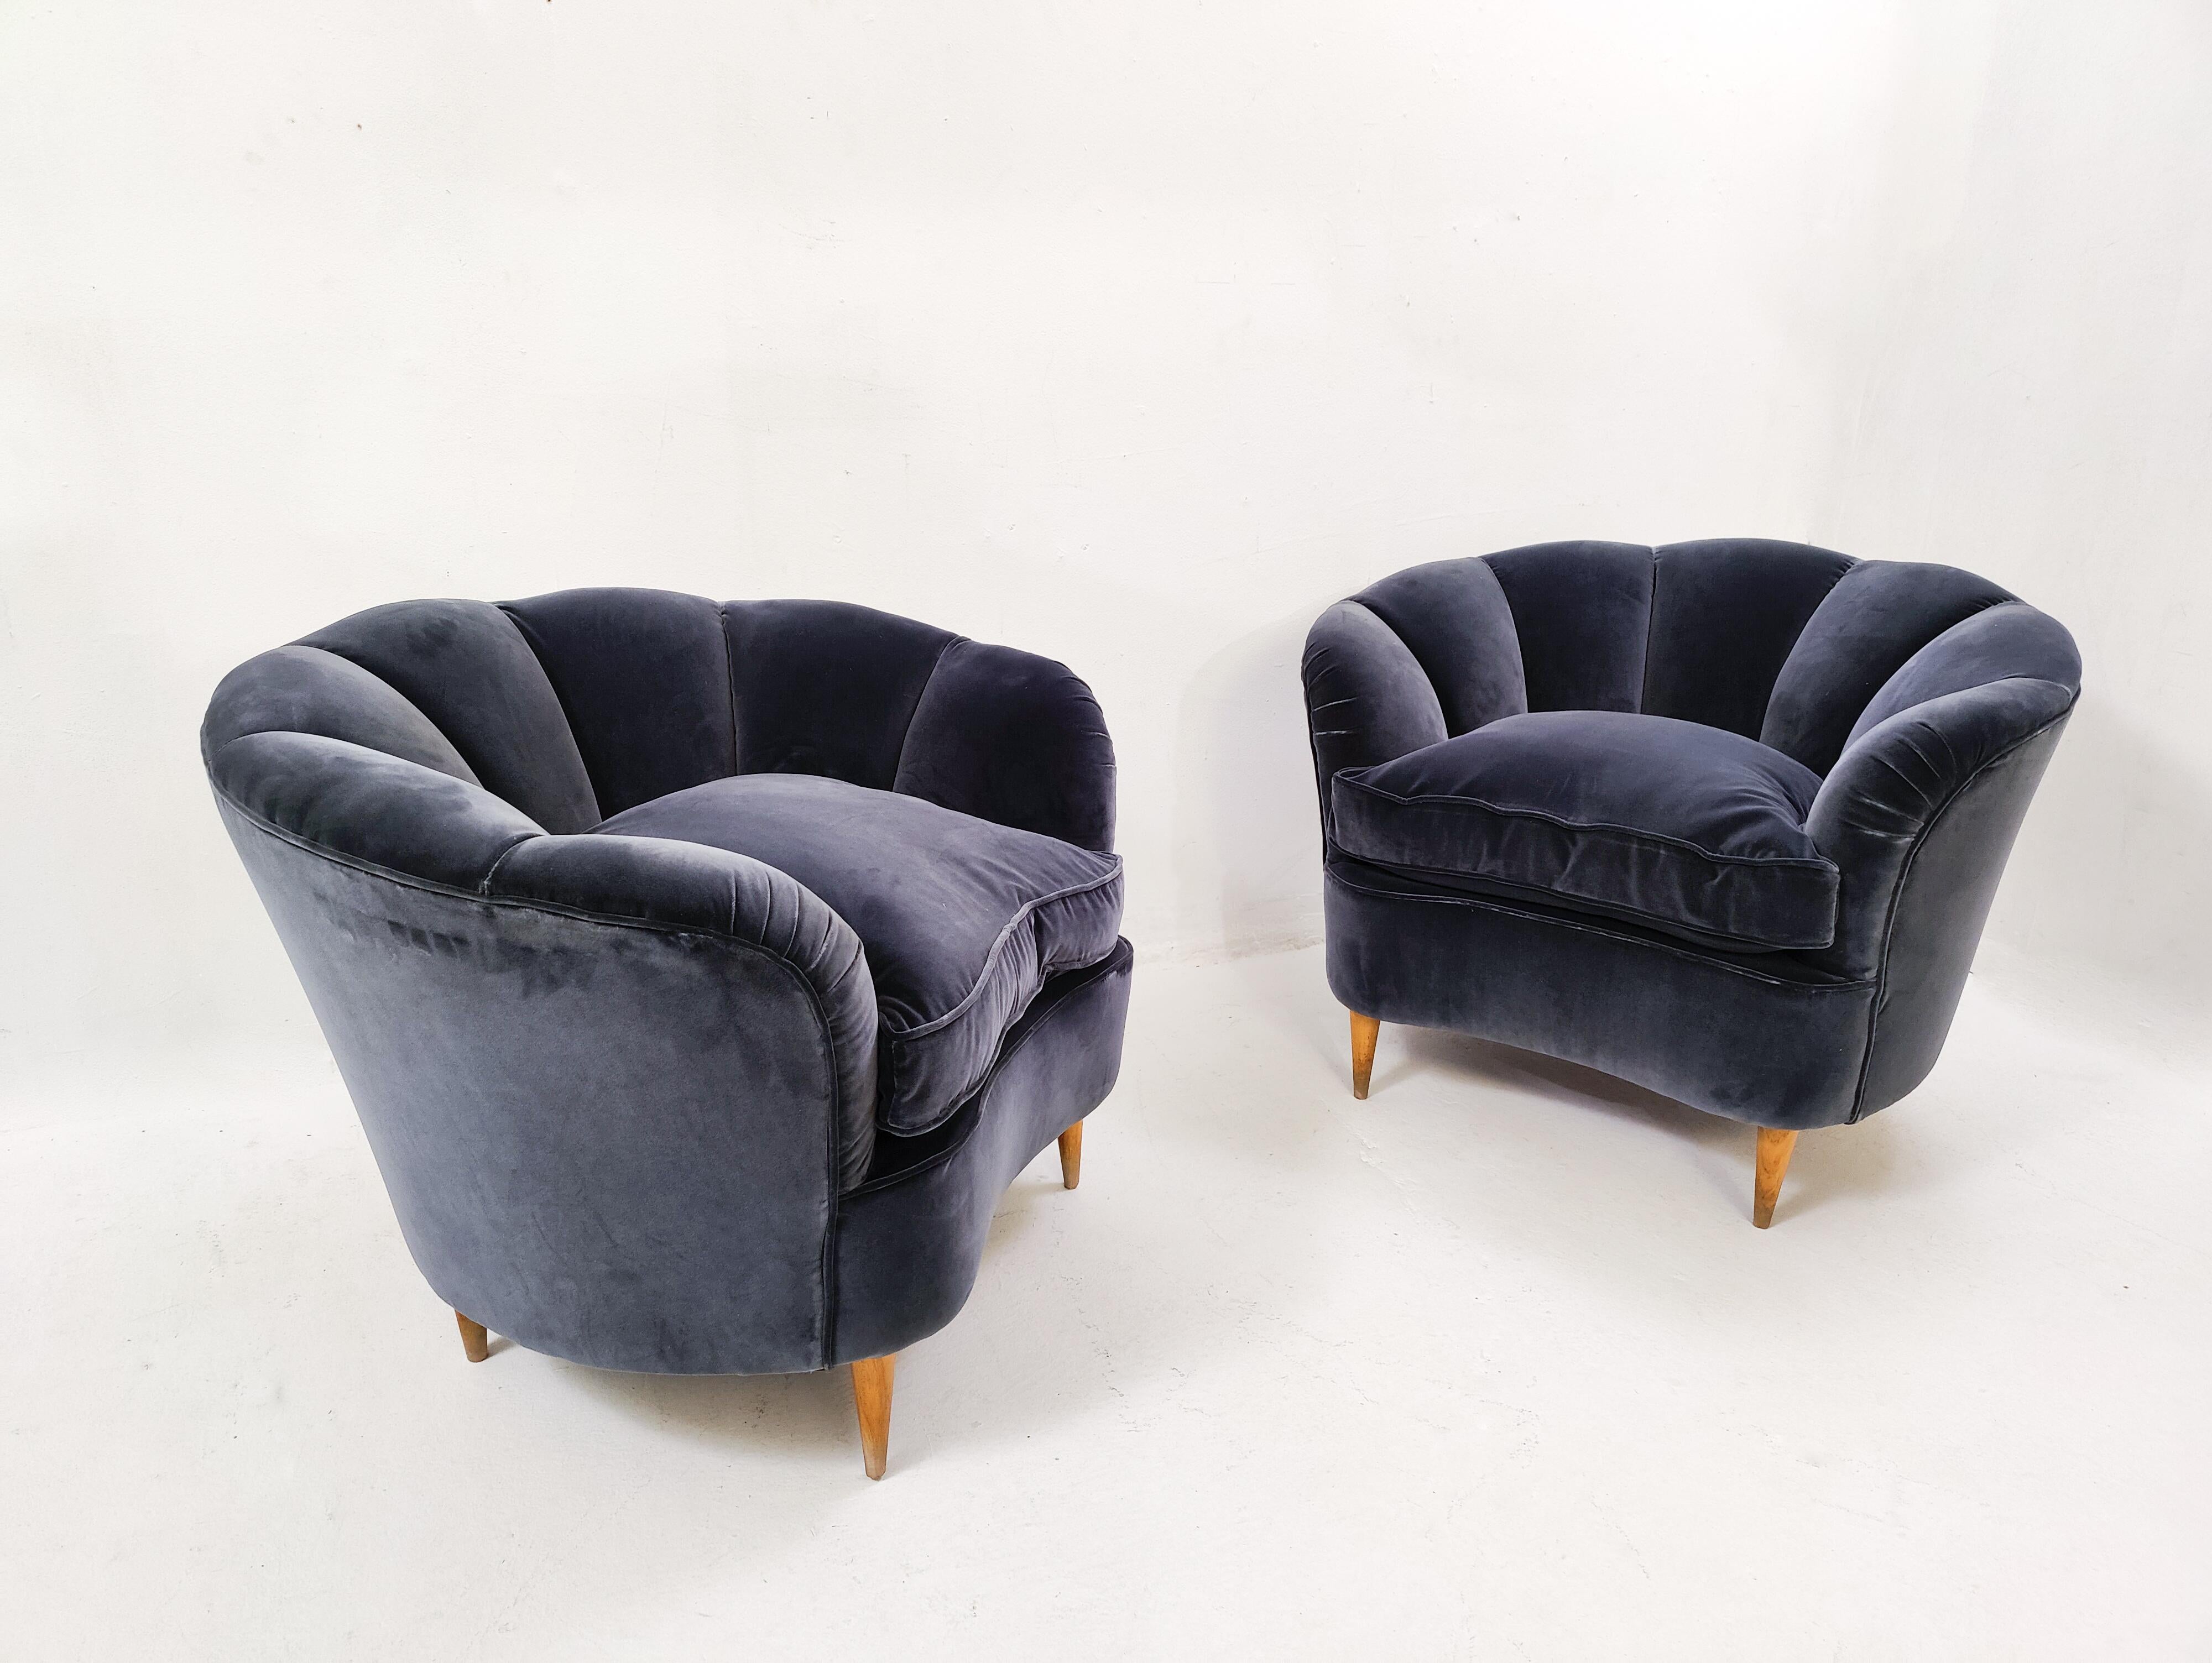 Pair of blue Italian armchairs, 1930s - new upholstery.